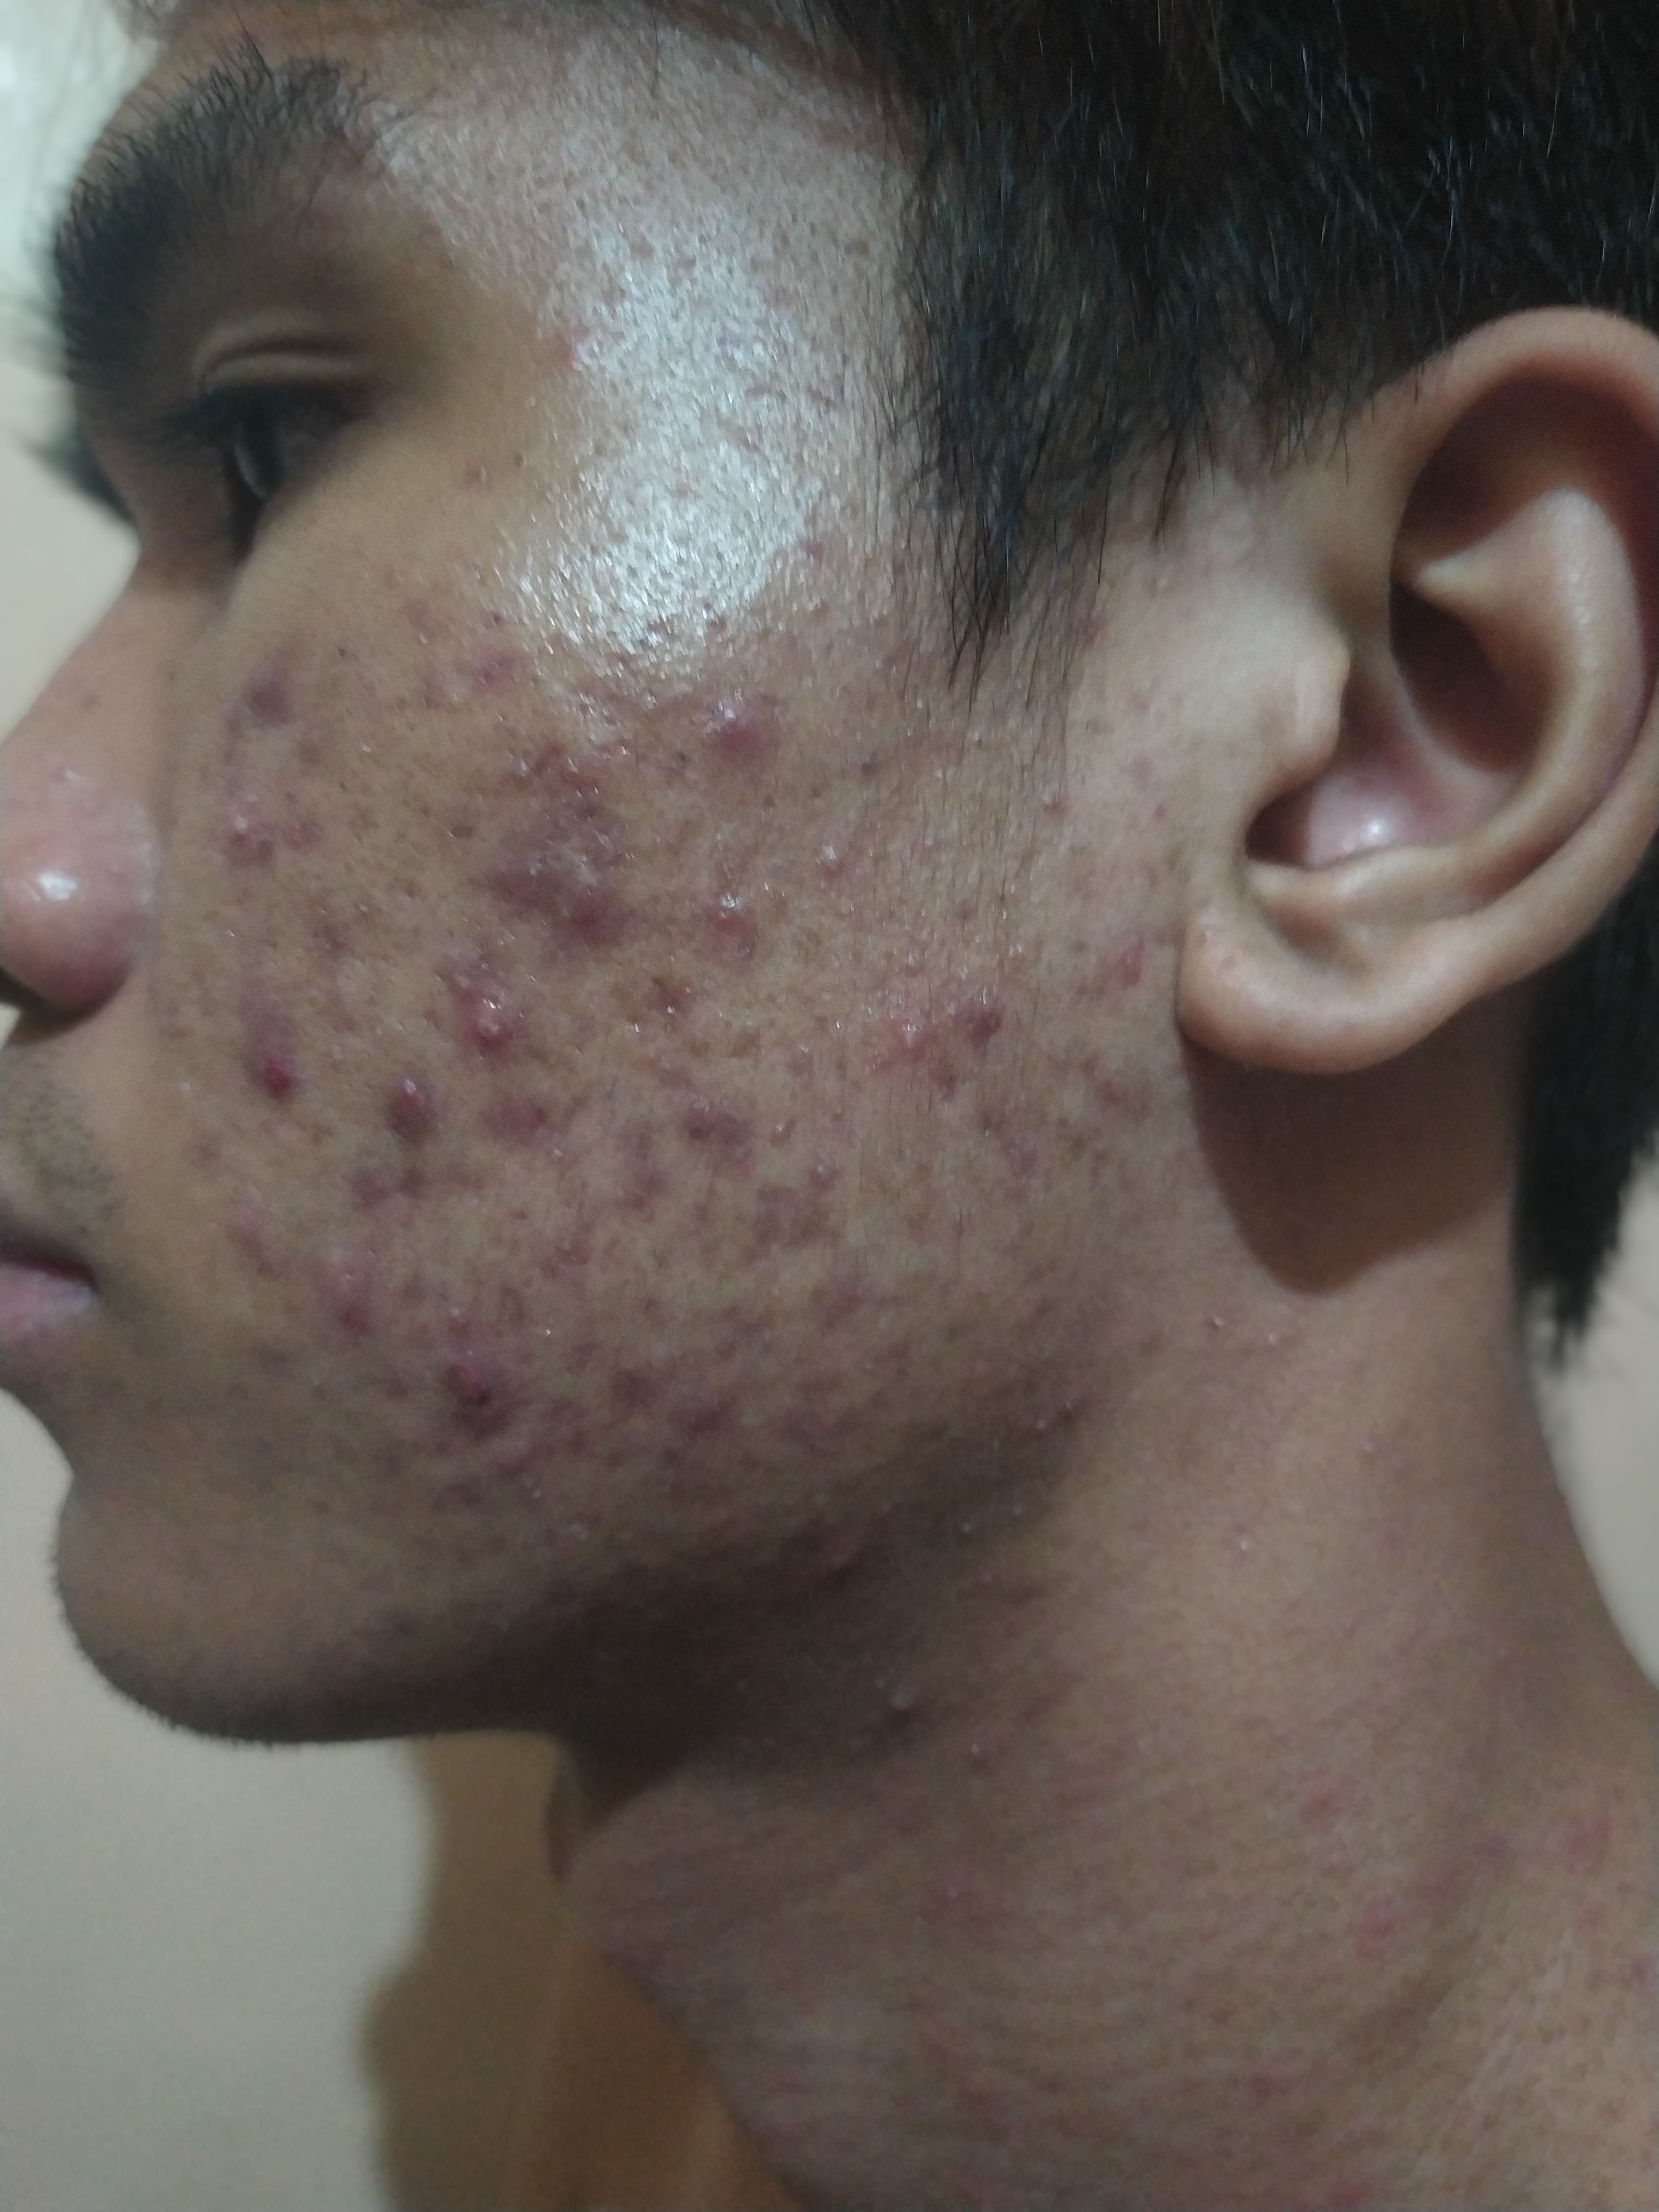 Please Help Me I Have A Severe Acne Condition General Acne